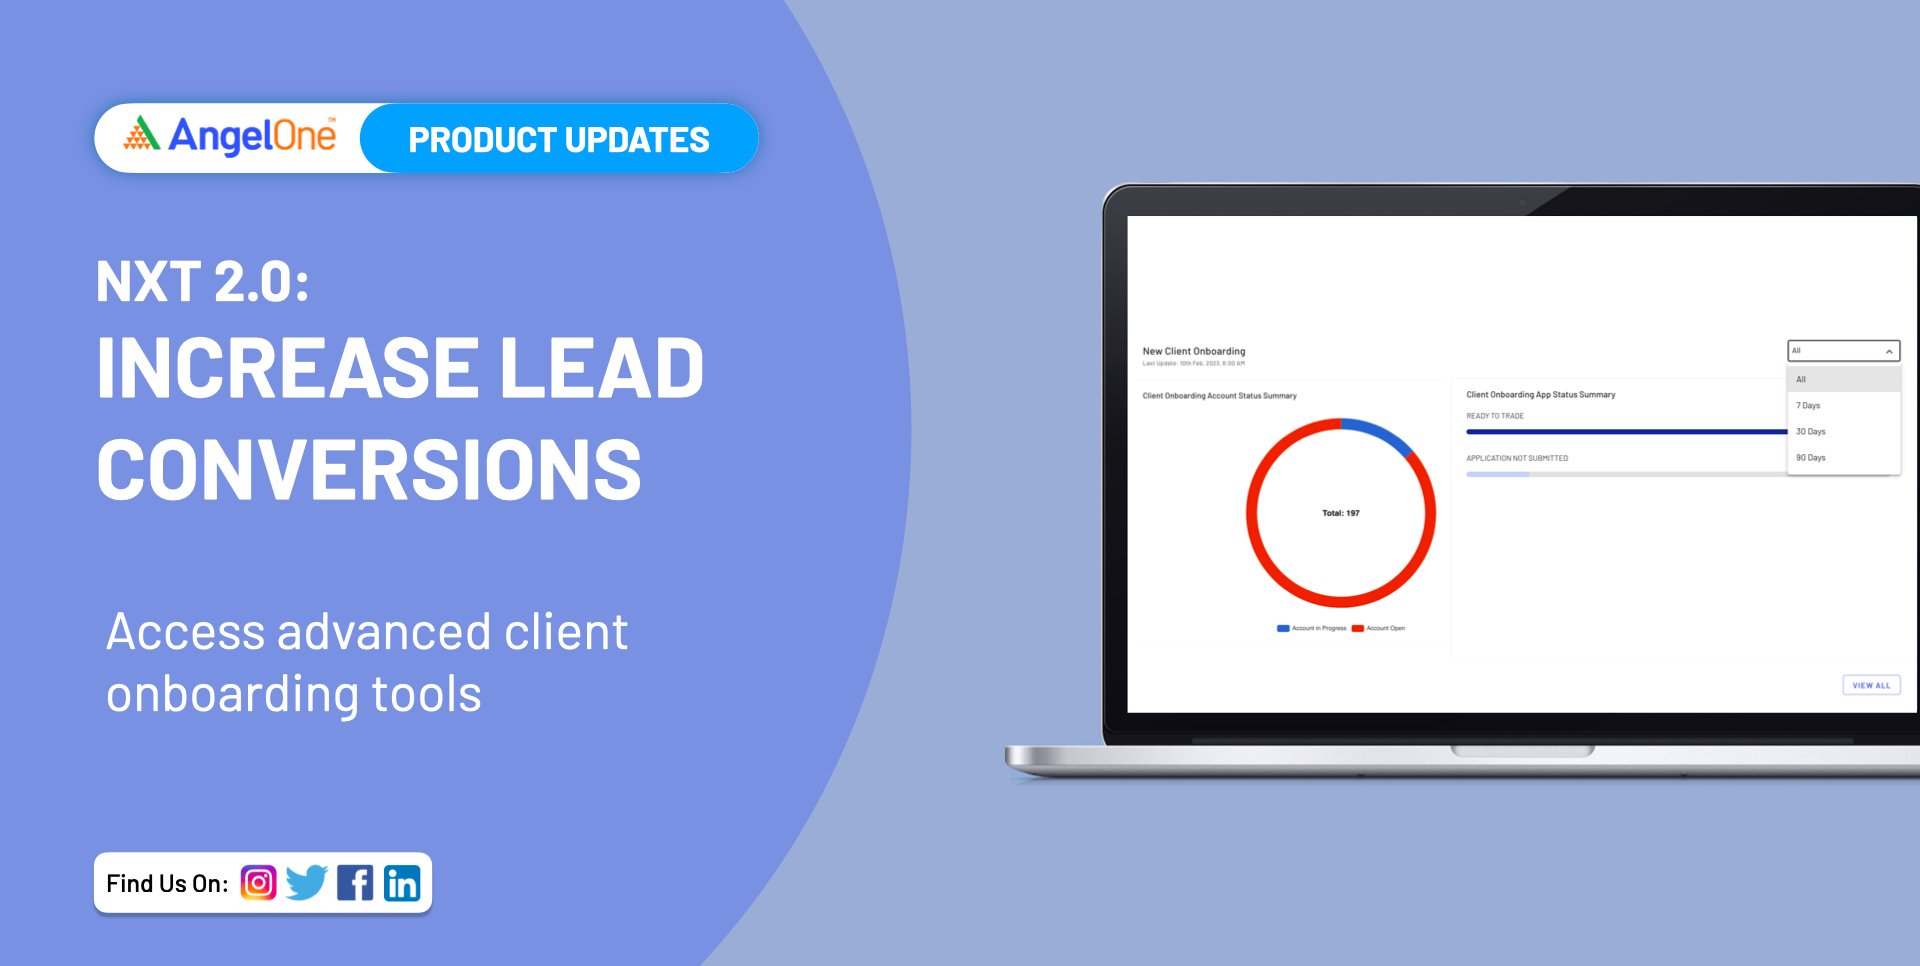 Increase Lead Conversions Using Advanced Client Onboarding Tools of NXT 2.0